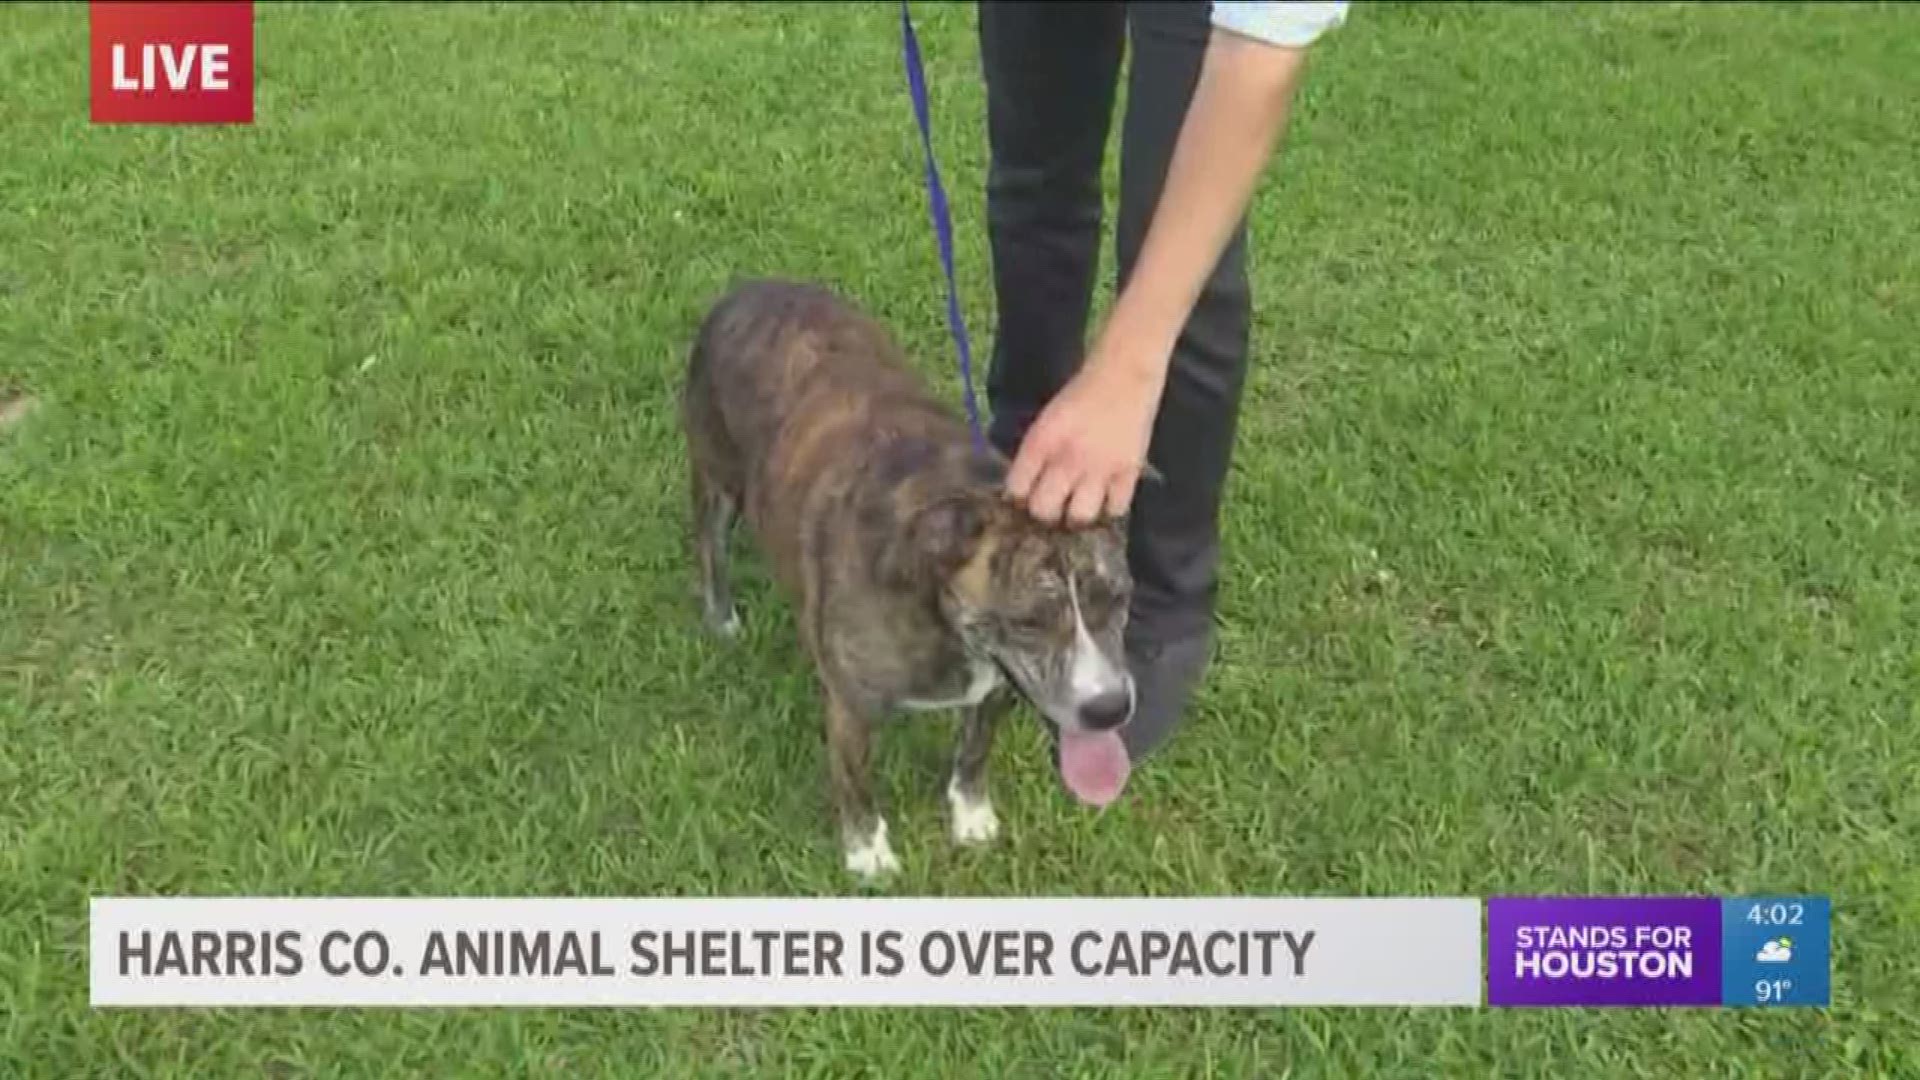 The Harris County Animal Shelter took in over 200 animals during the Memorial Day weekend and volunteers say they are well over capacity to house the animals. 